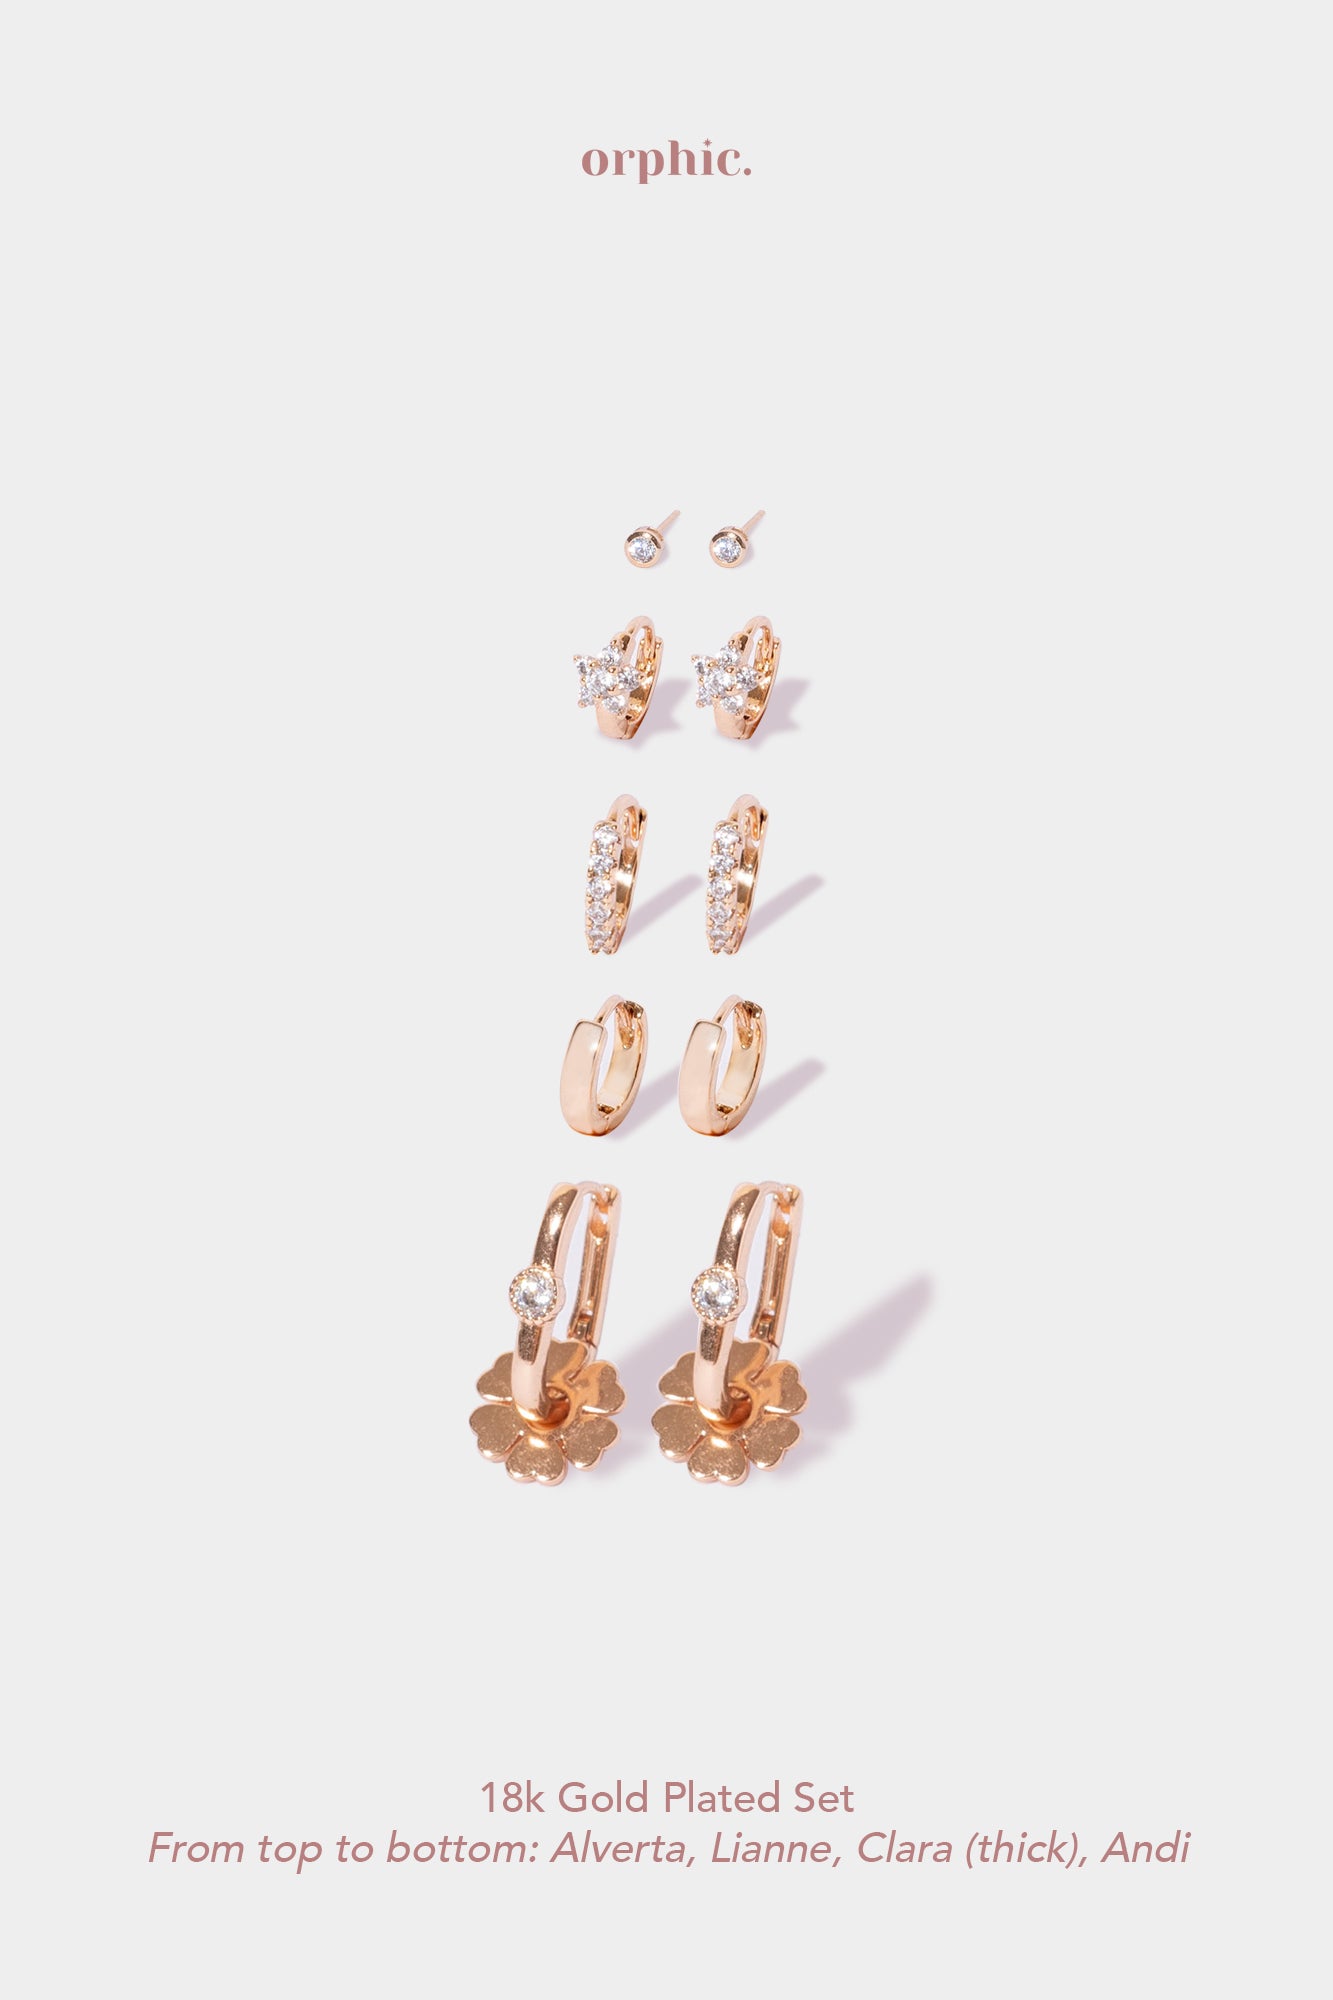 Everly 18k Gold Plated Earring Set